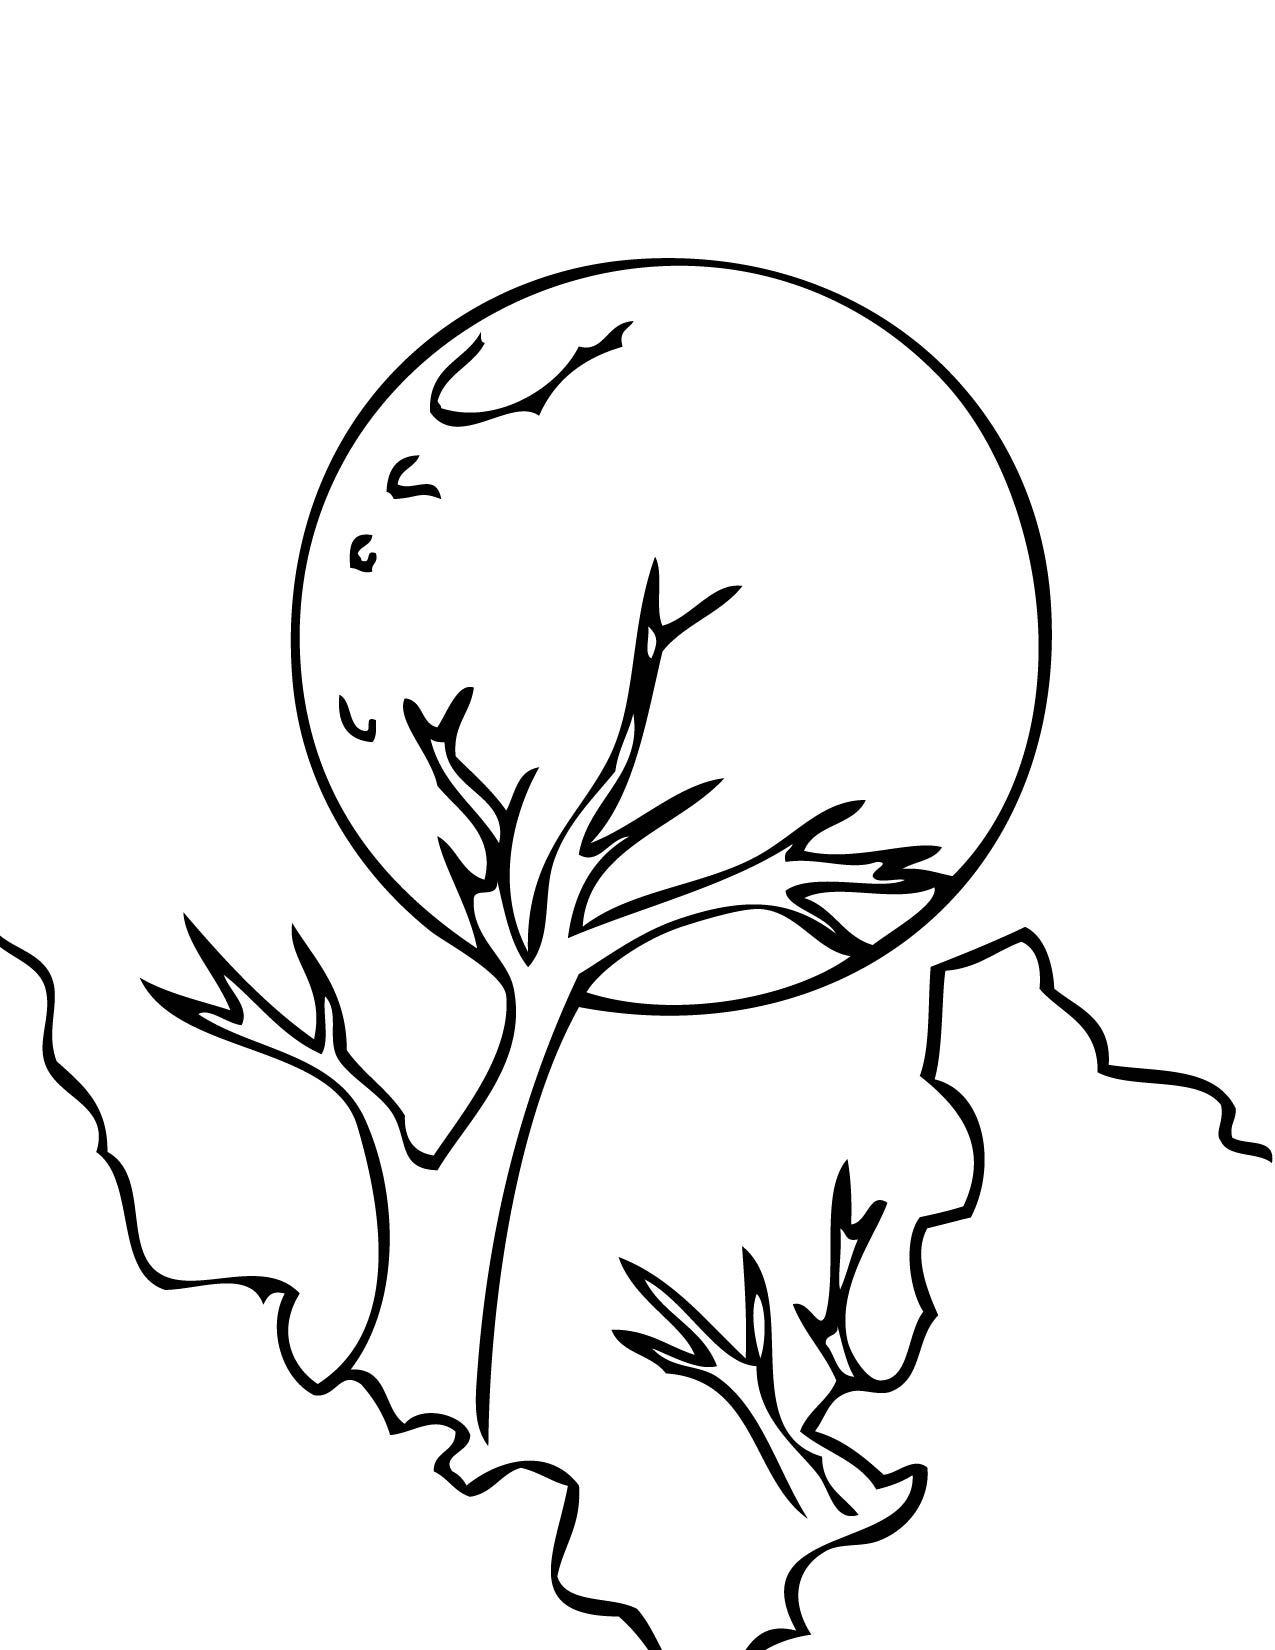 Printable Moon Coloring Pages Pdf - Full Moon Coloring Pages